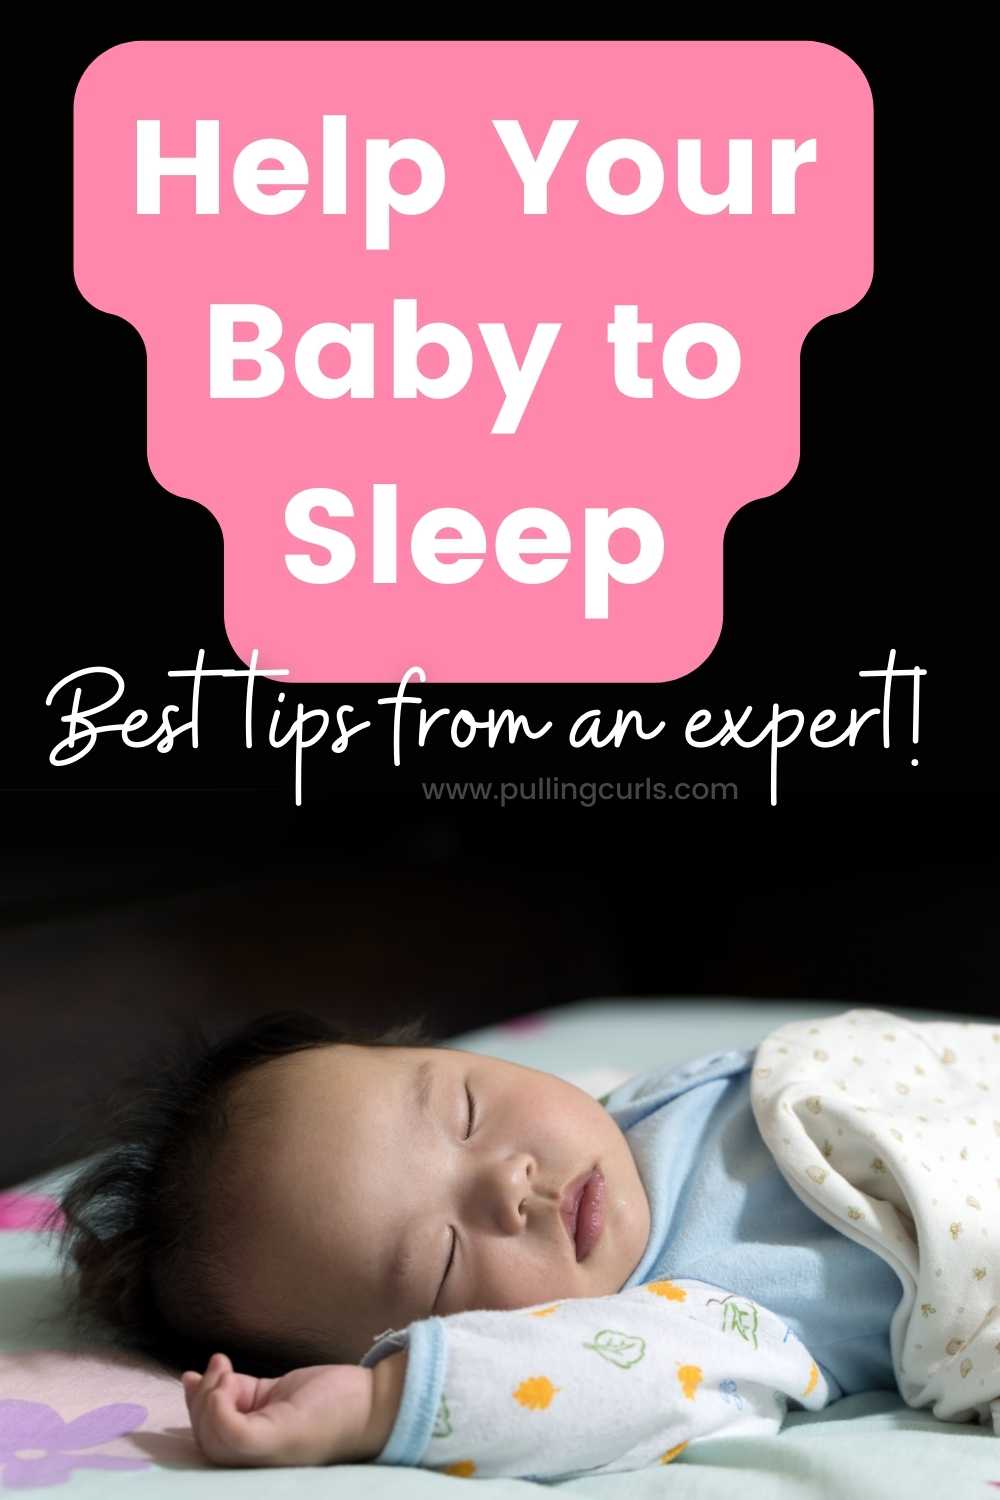 If your baby is having trouble sleeping through the night, you don't have to suffer in silence. There are many tips and tricks you can use to help your baby establish a healthy sleep routine and get the rest they need. From soothing nighttime rituals to sleep schedules and nap times, you can help your baby have better sleep and healthier days. via @pullingcurls